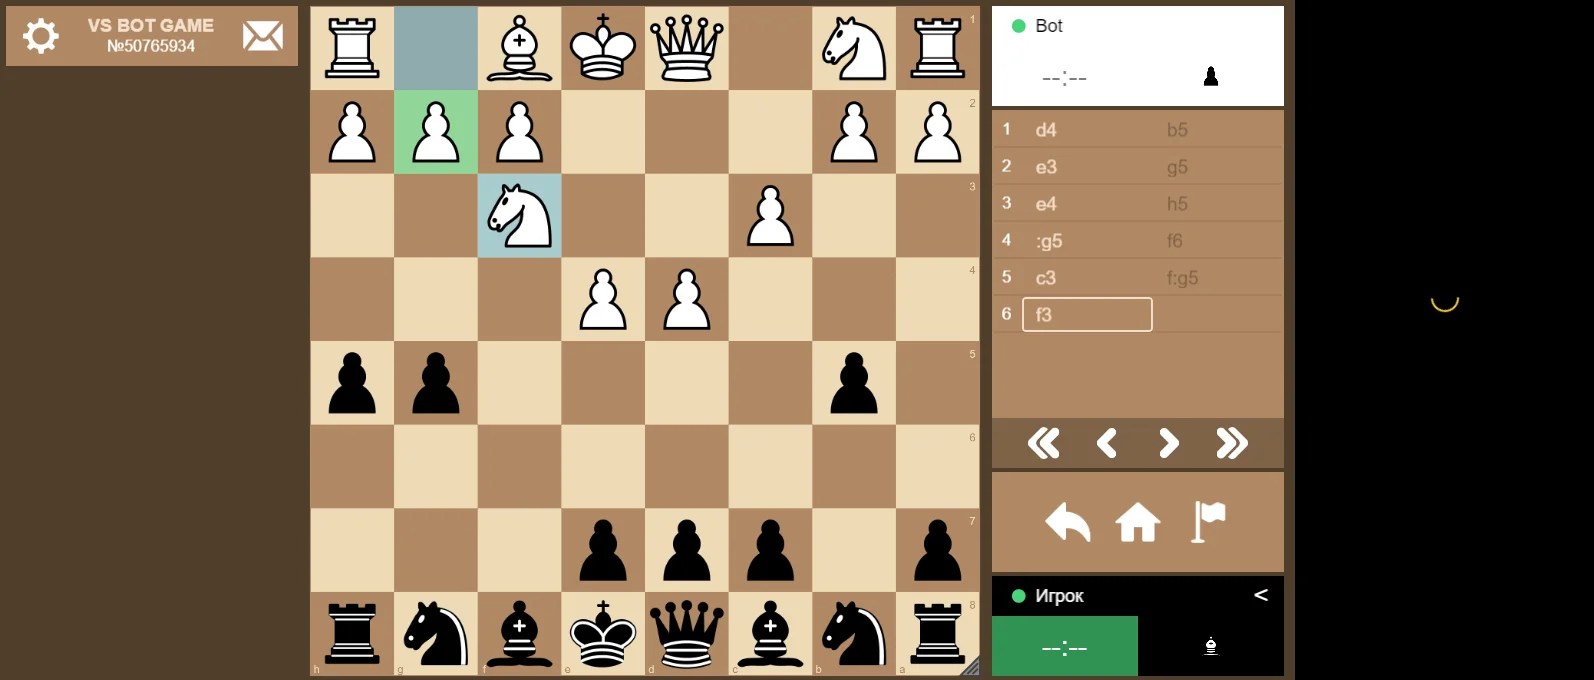 The Chess online game